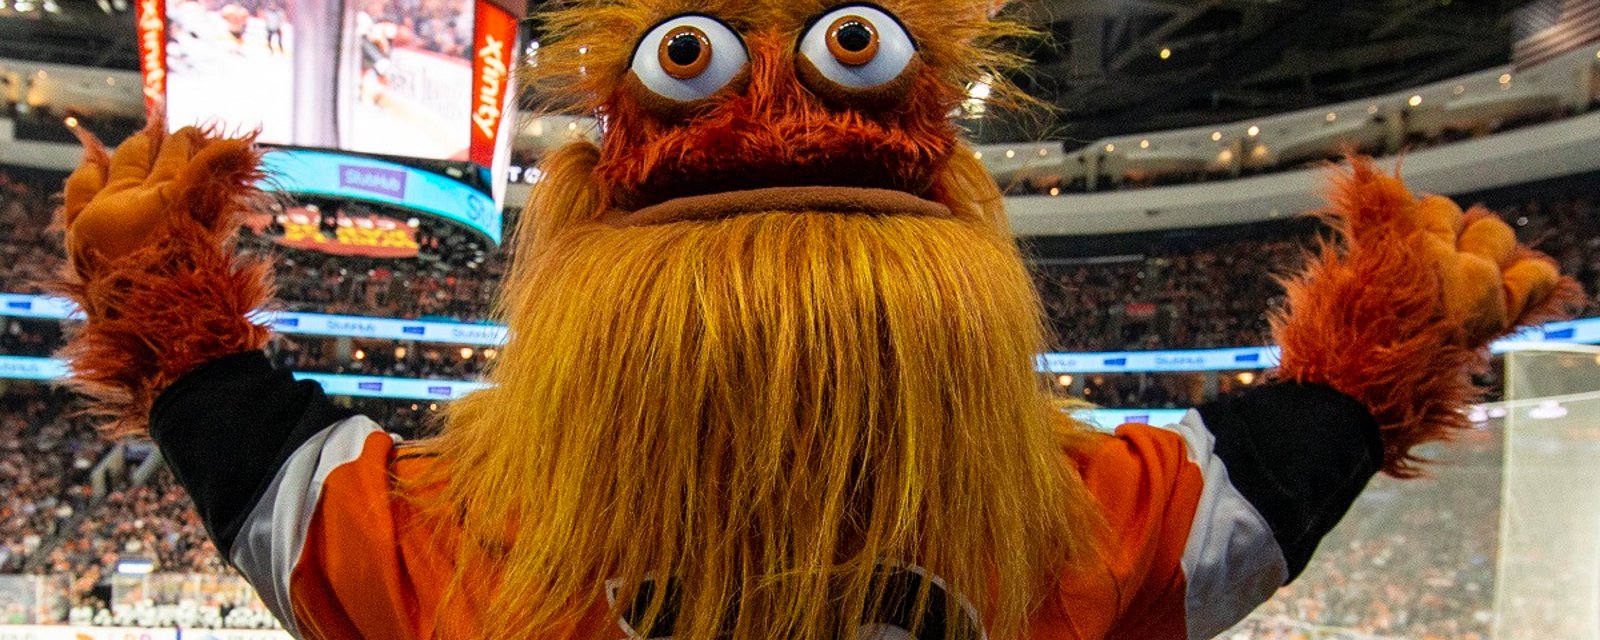 Little boys “Gritty” costume is the cutest thing you're ever going to see.